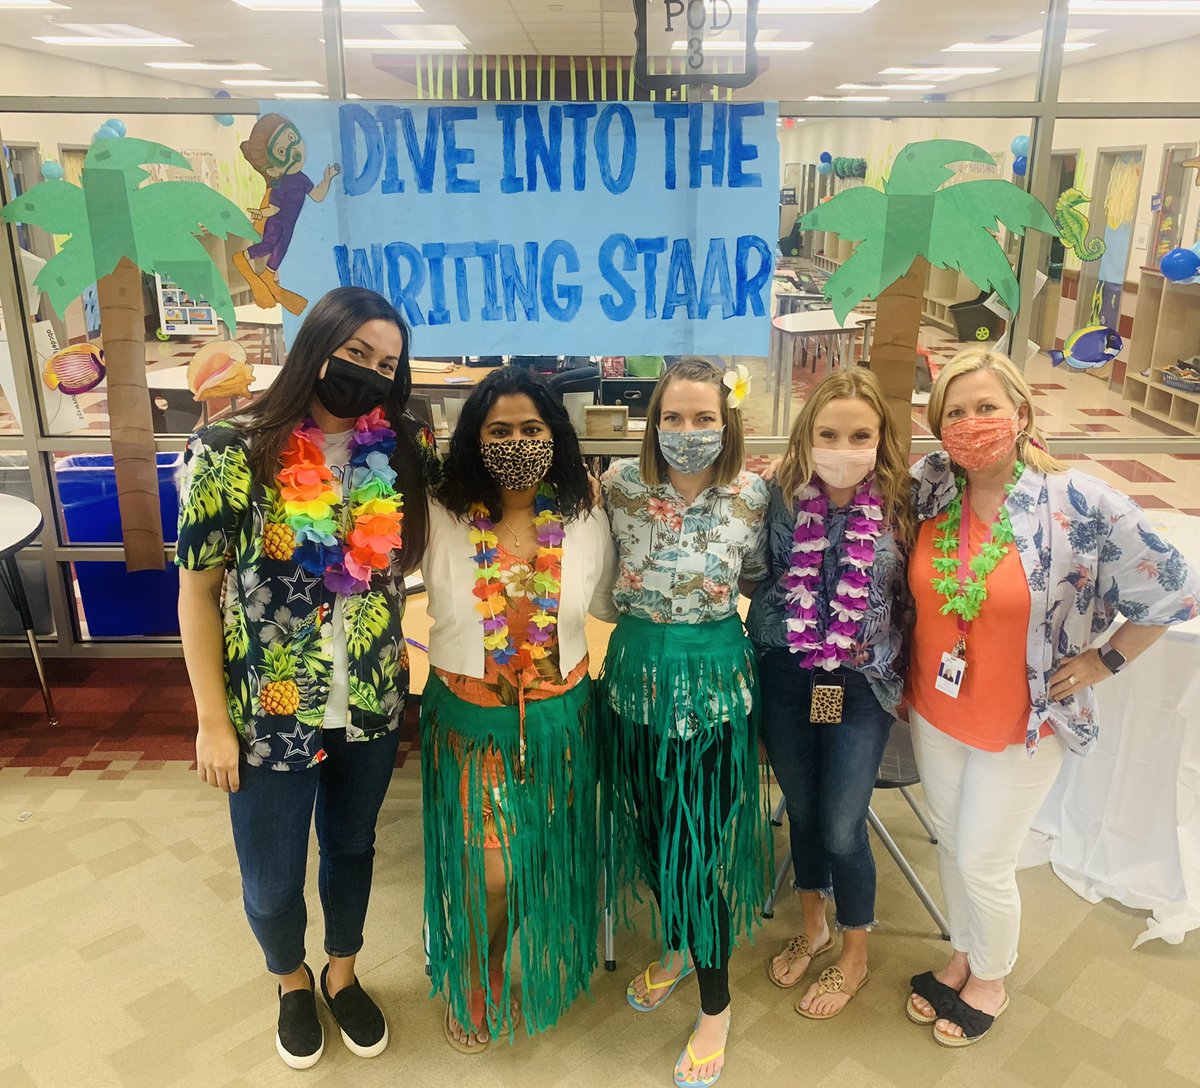 Let’s Dive into the Writing Staar and SEAS the day!! #Team4th #WeareMilller #makelearningfun #allworthit #happystudents @CoyMillerElem @MsSotello4ths